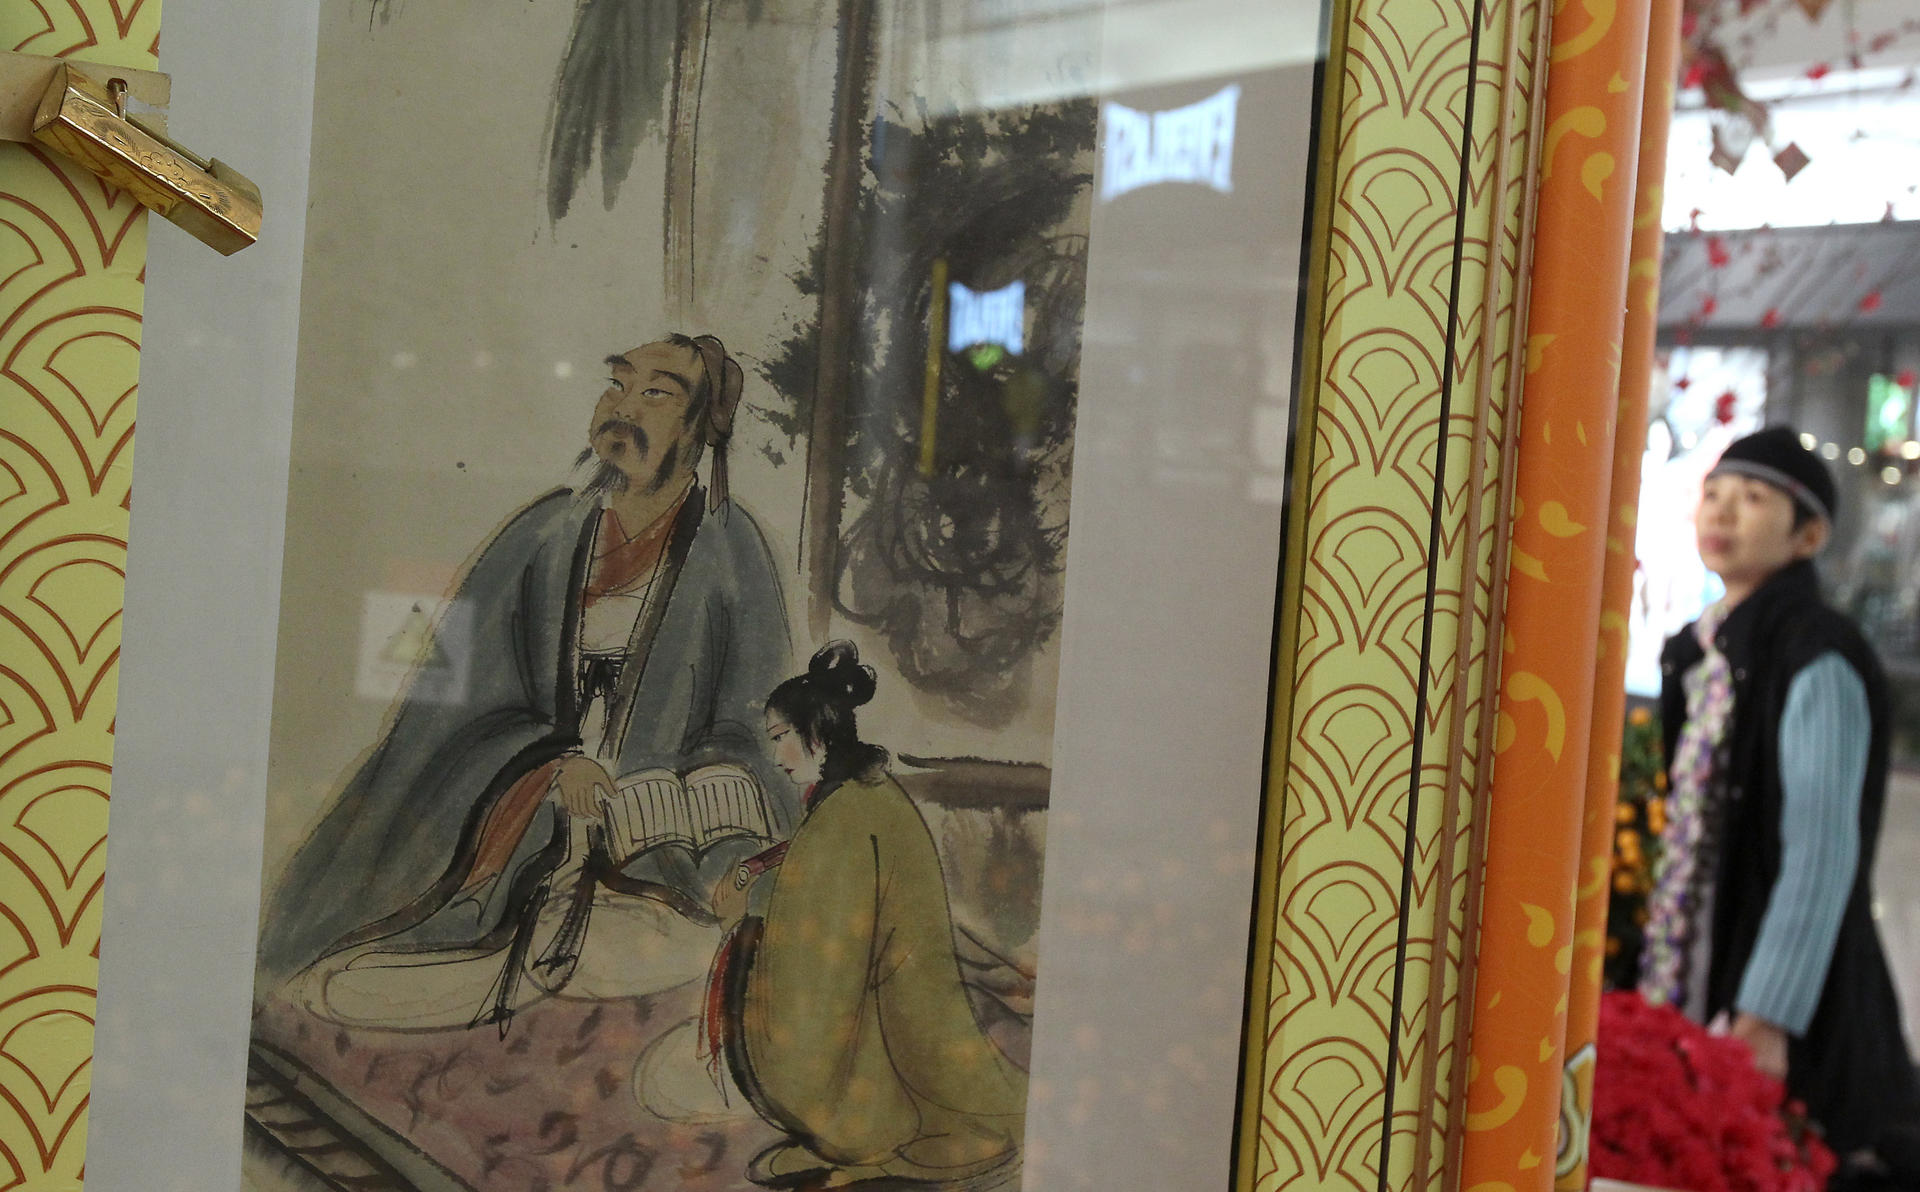 The 15 works exhibited in Plaza Hollywood are forgeries, says the granddaughter of master painter Fu Baoshi. Photo: K. Y. Cheng